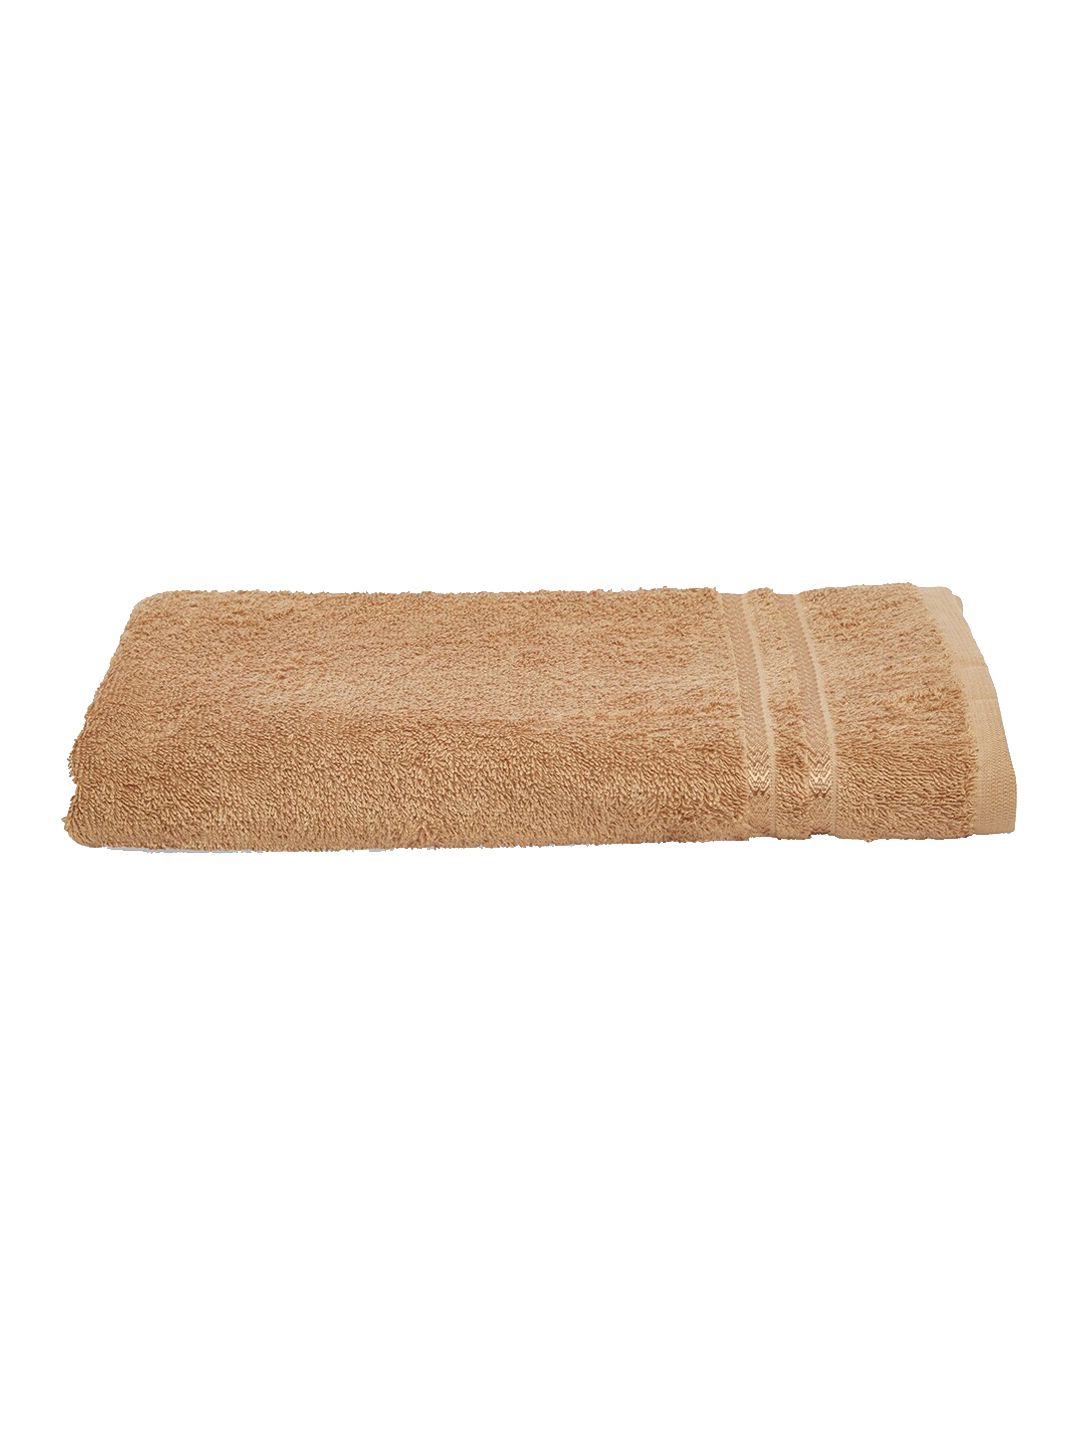 Welspun Tan-Coloured Solid 380 GSM Pure Cotton Bath Towel Price in India